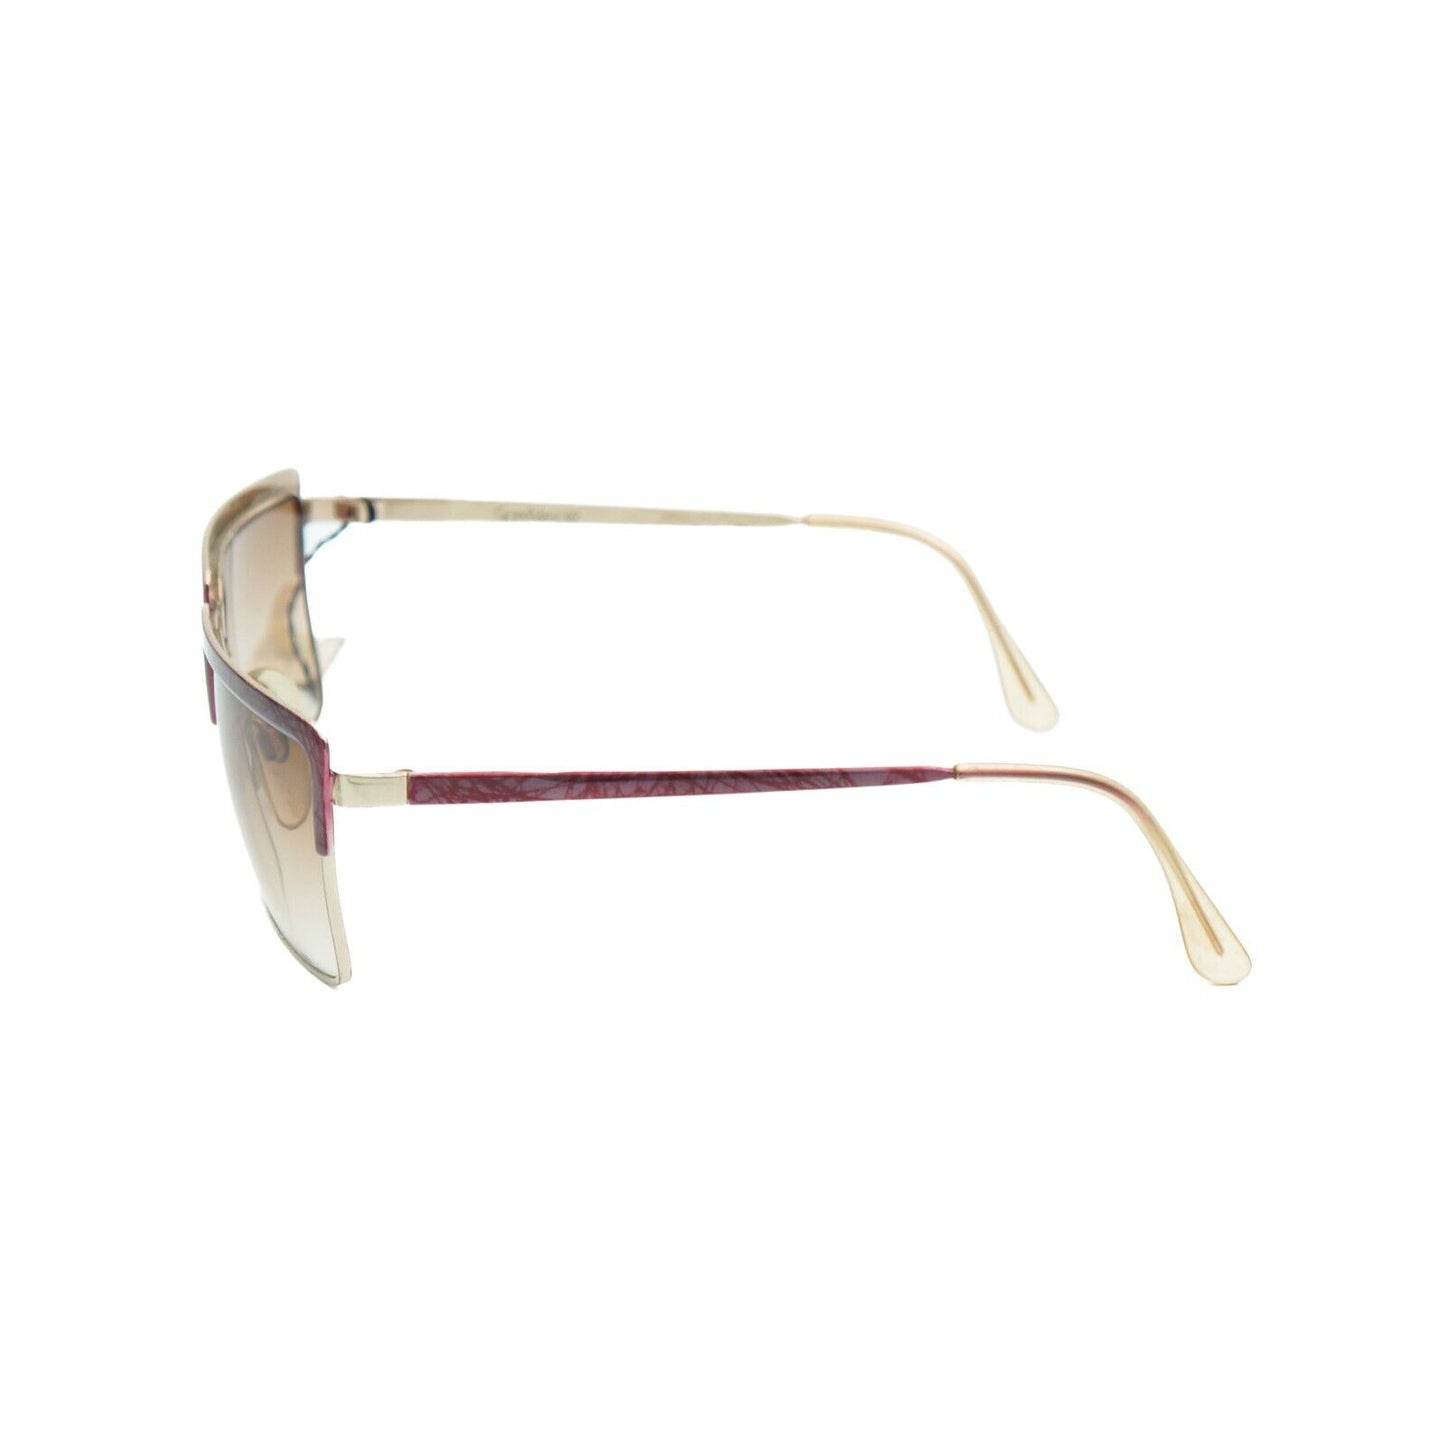 GIANNI VERSACE Square Metal Pink Sunglasses Vintage 80s 90s